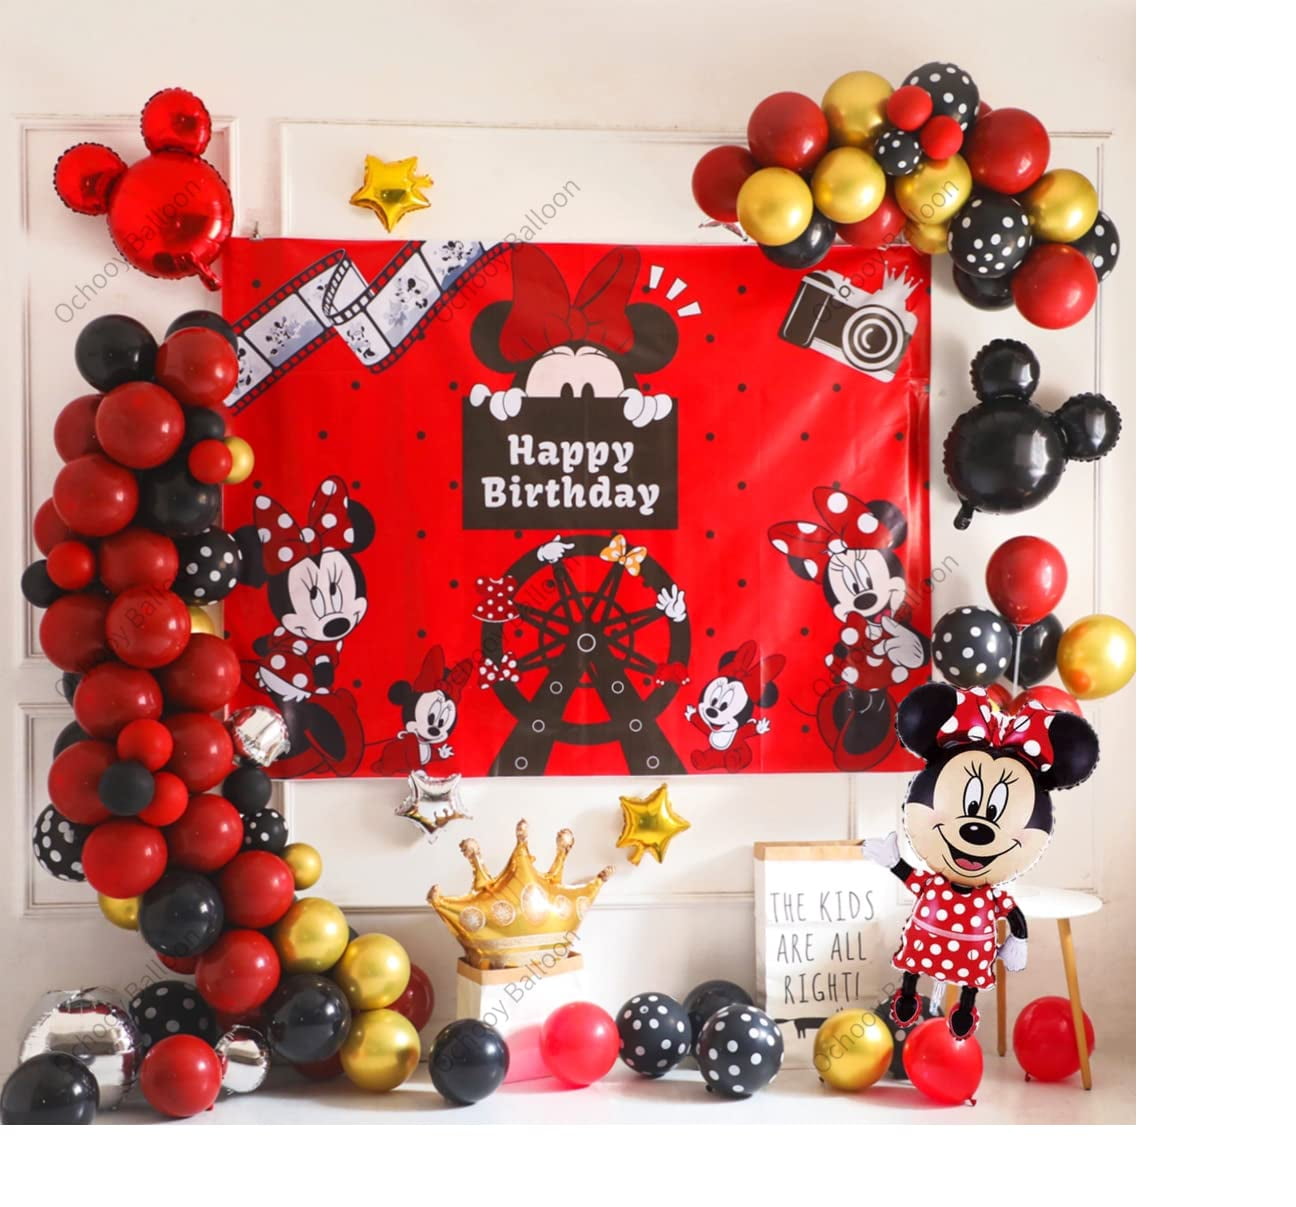 DIY 1st Birthday Minnie Mouse Party - Parties by Tanea